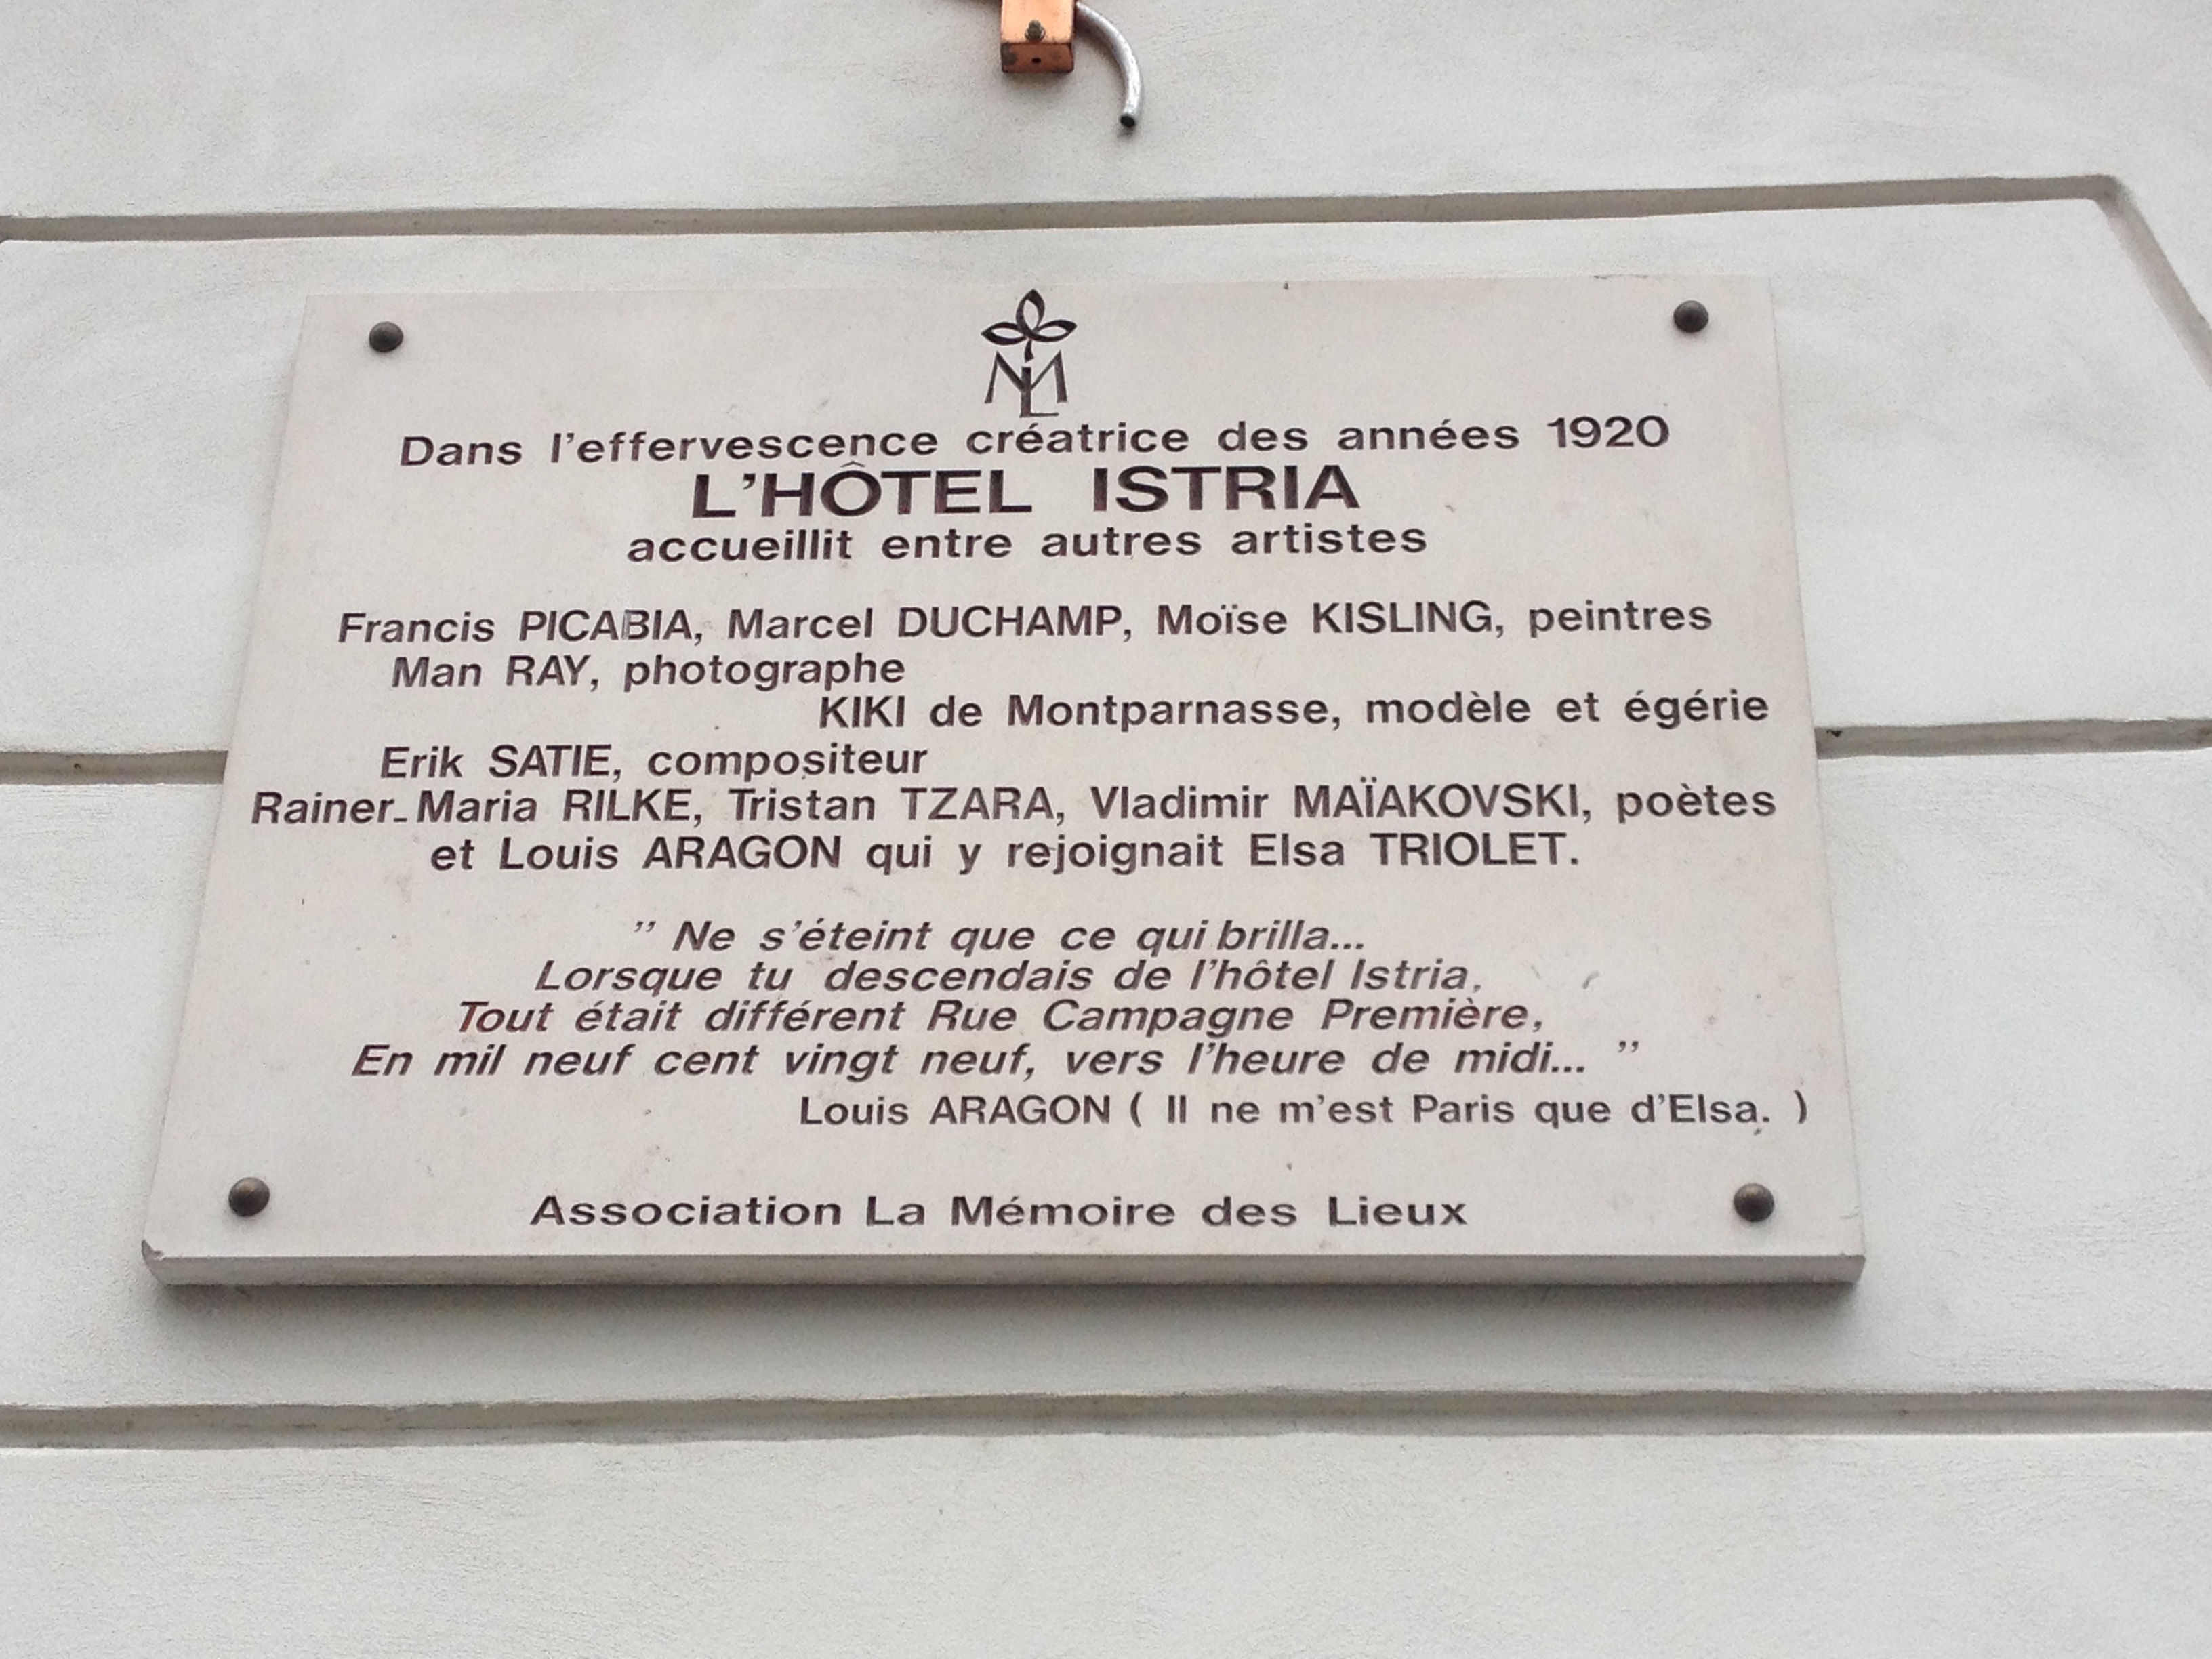 The plaque at Hotel Istria, noting such visitors as DuChamp, Man Ray and Kiki of Montparnasse.